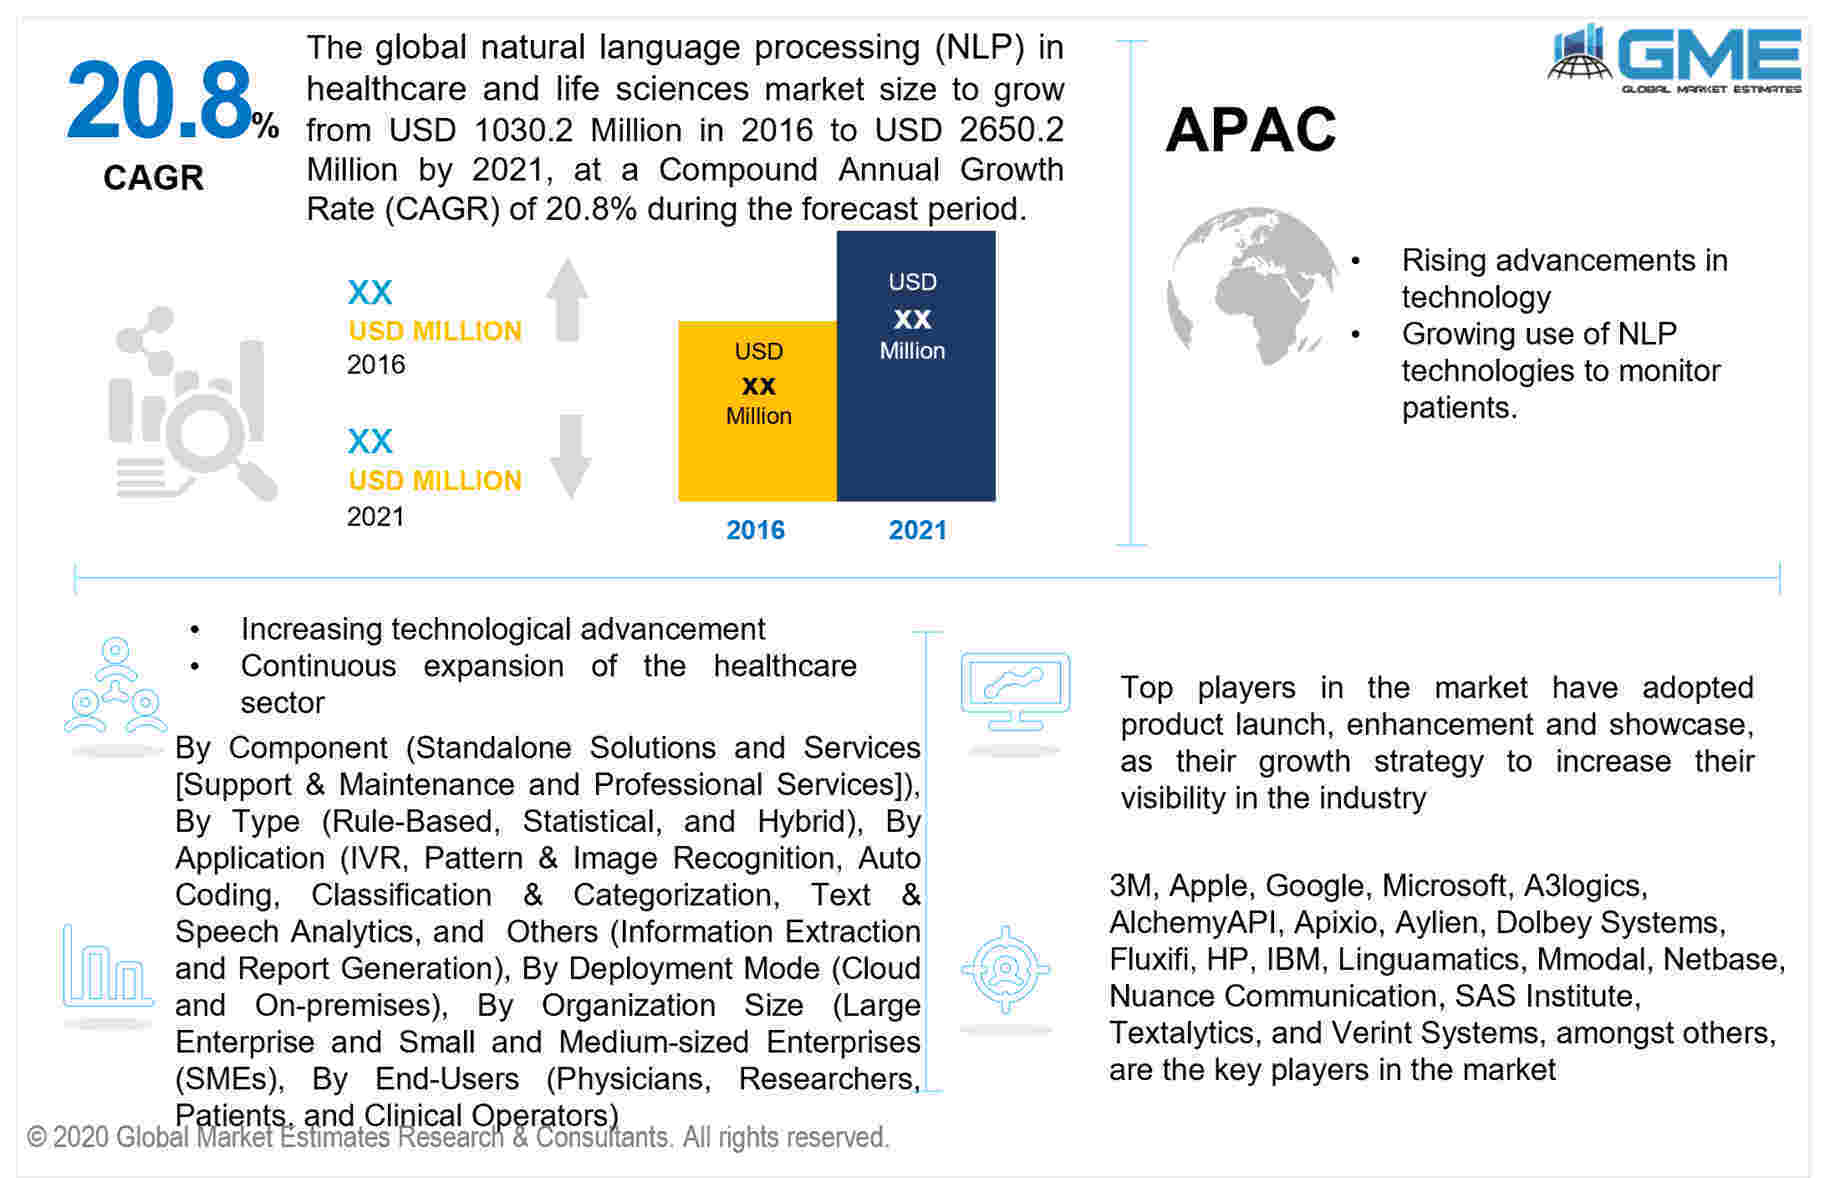 global natural language processing (nlp) in healthcare and life sciences market